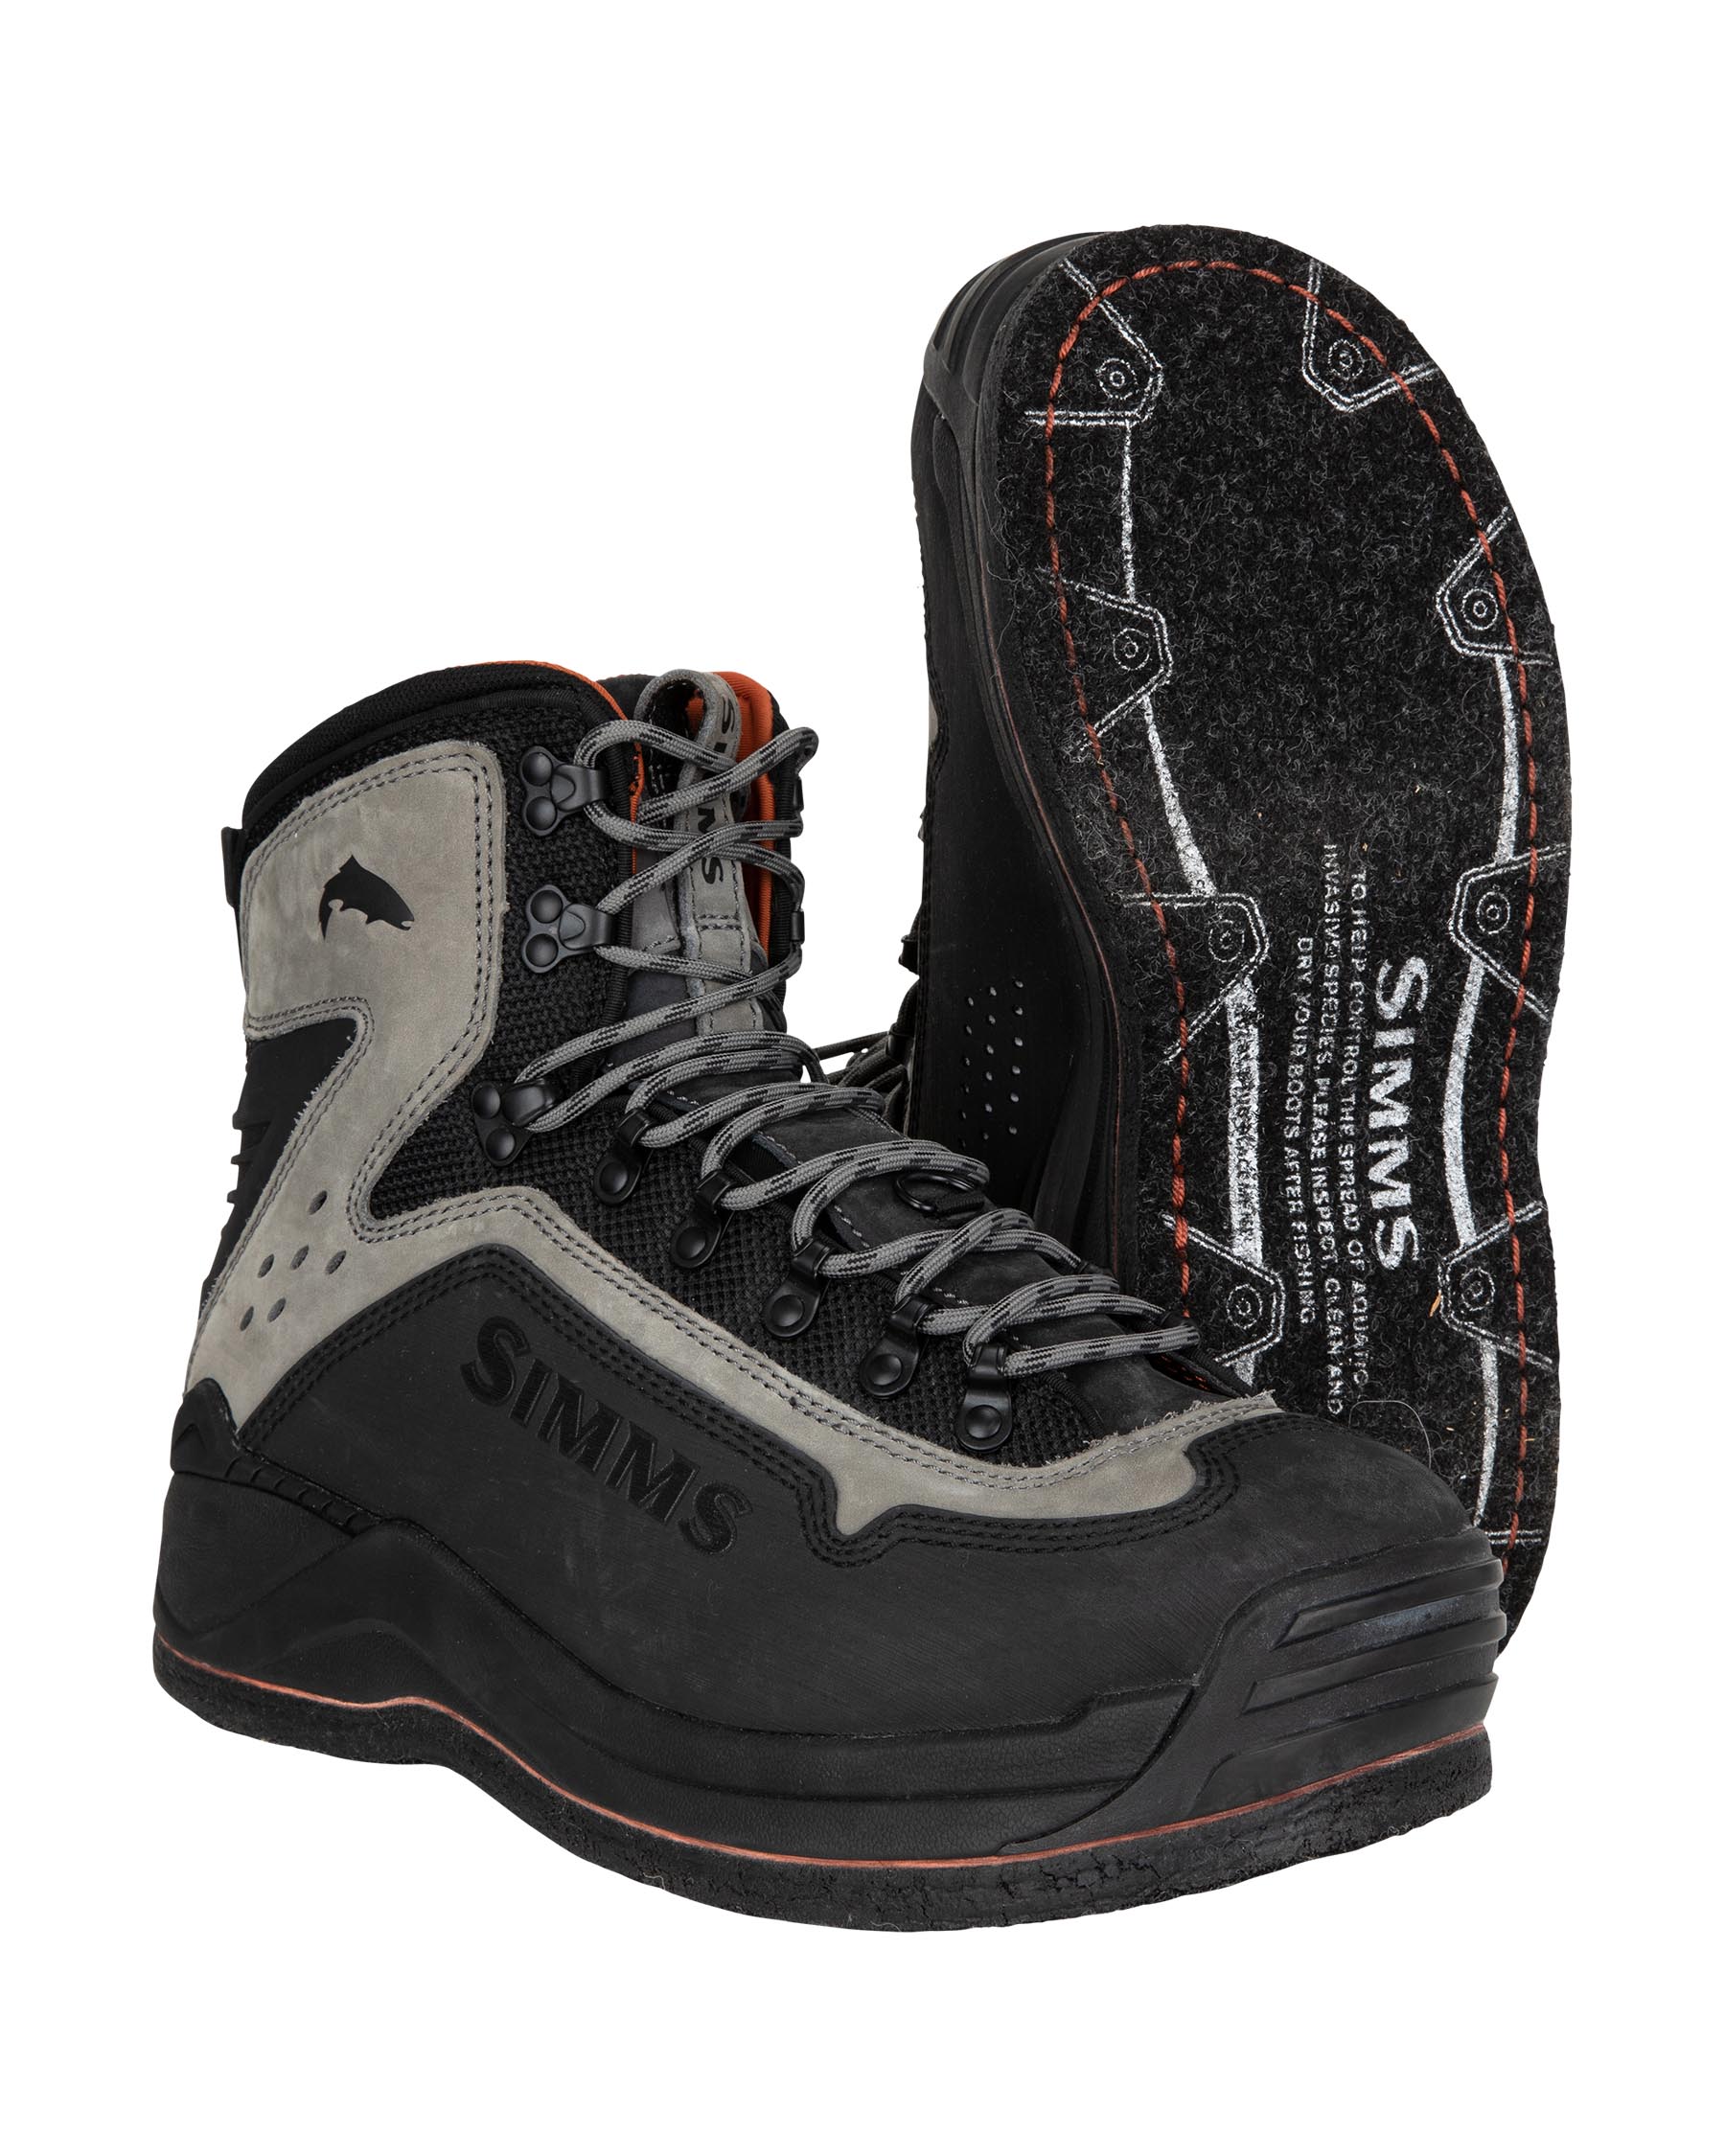 Simms G3 Guide Wading Boots -  Felt Soles